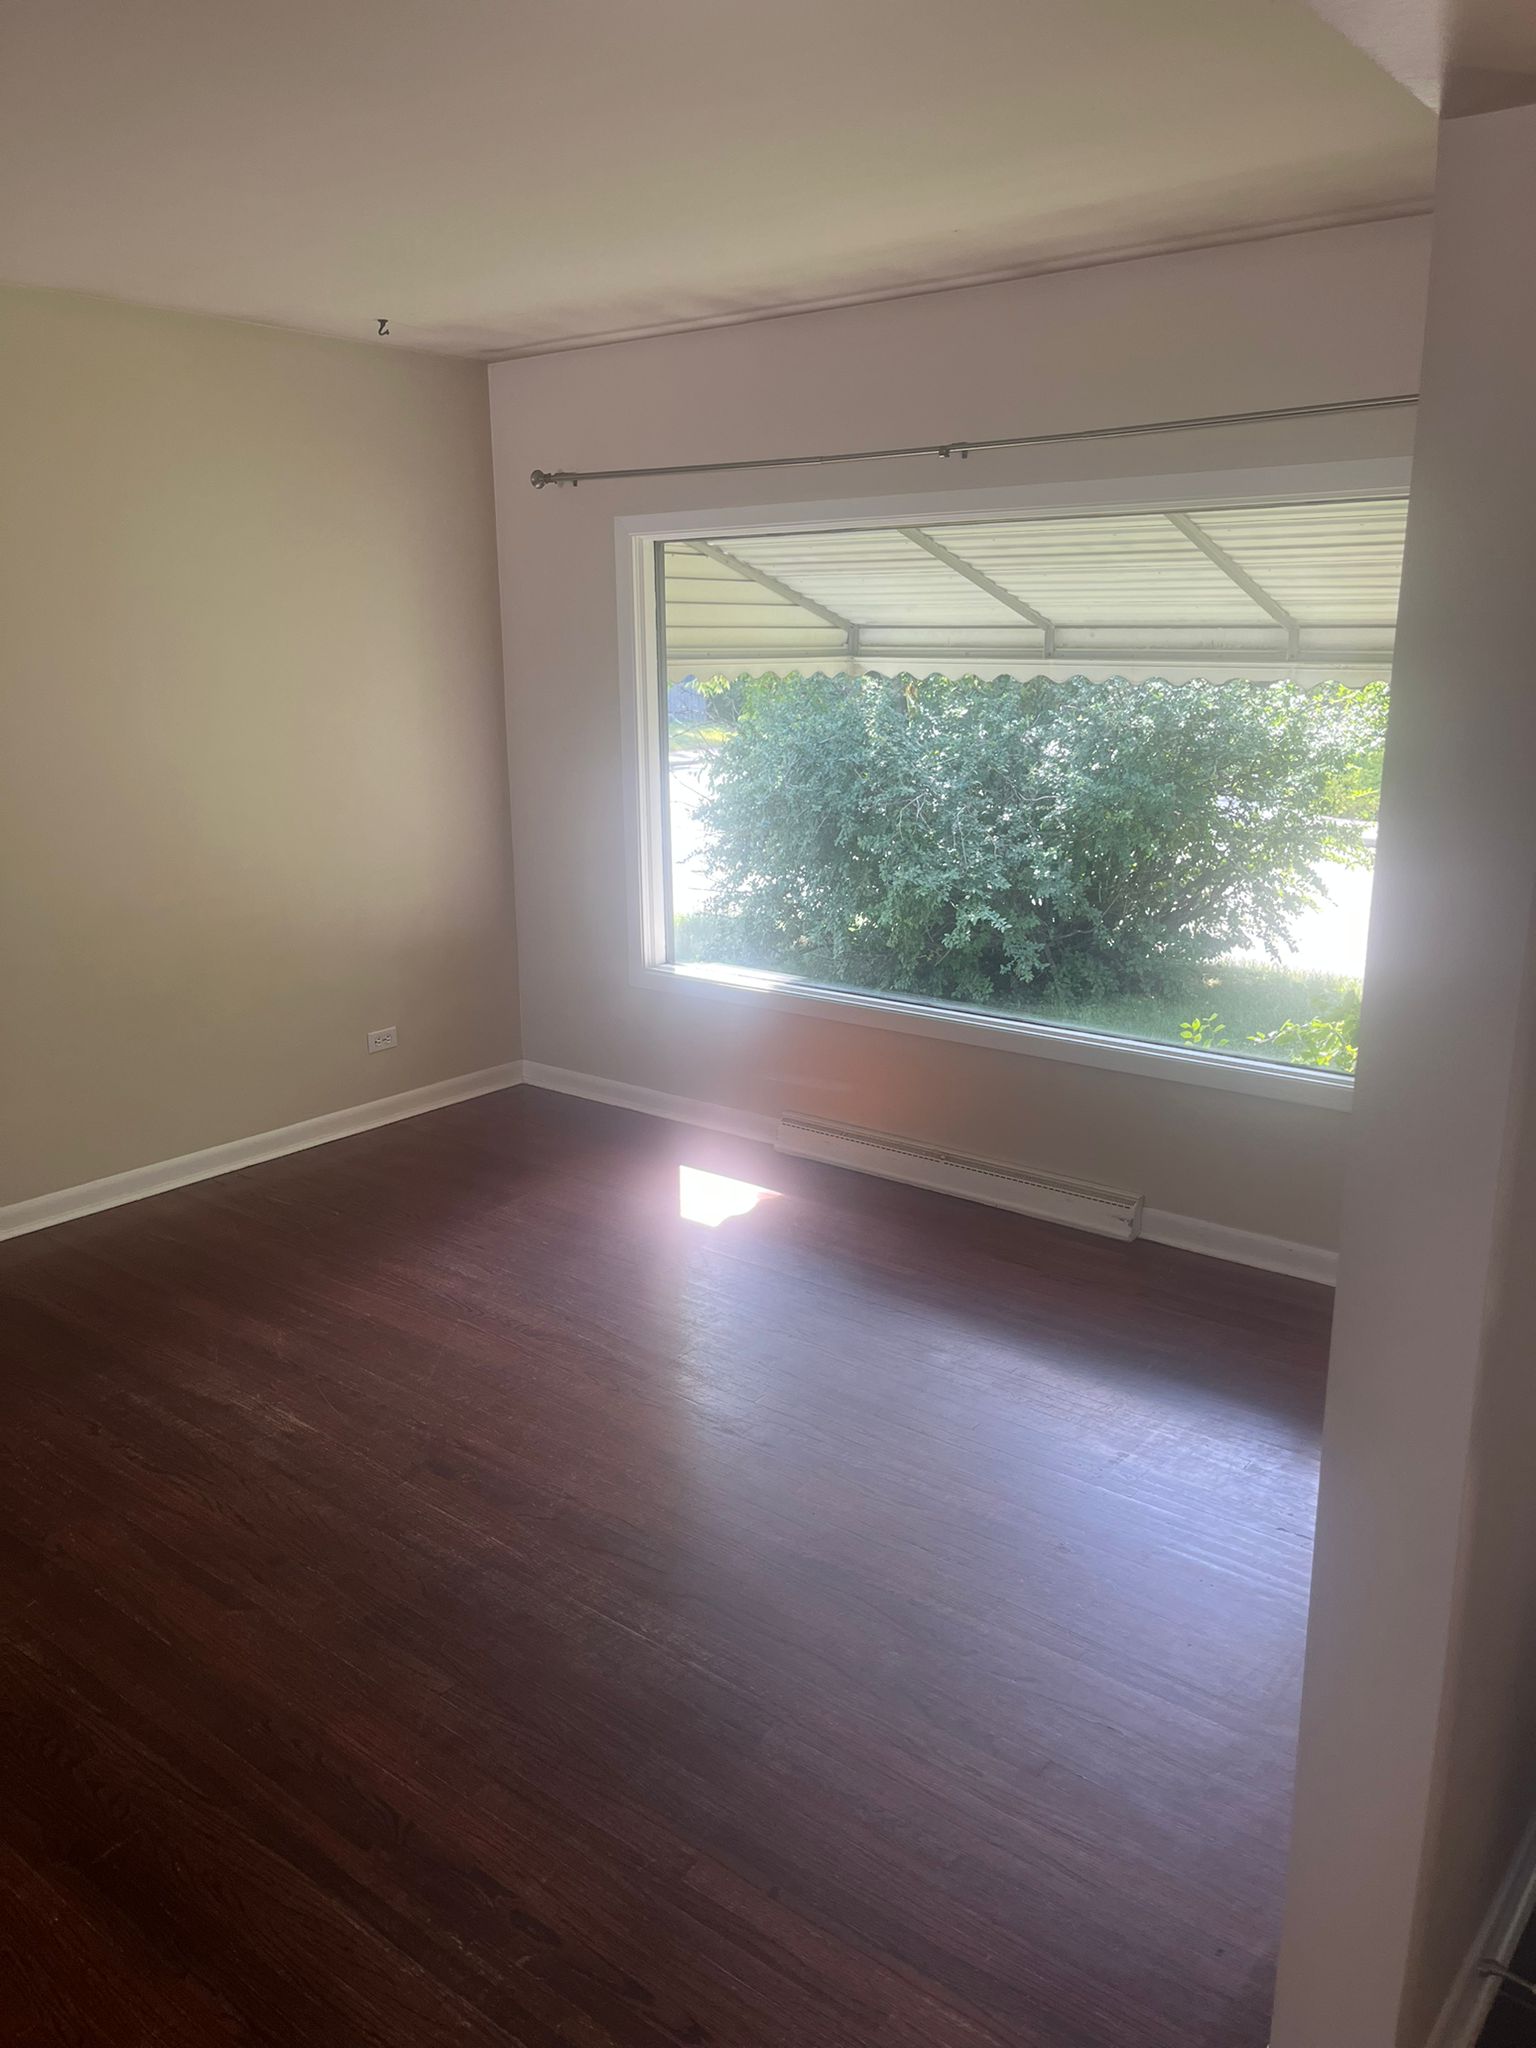 WELL MAINTAINED 5 BDRMS 2 BATH HOUSE FOR RENT IN HIGHLAND PARK